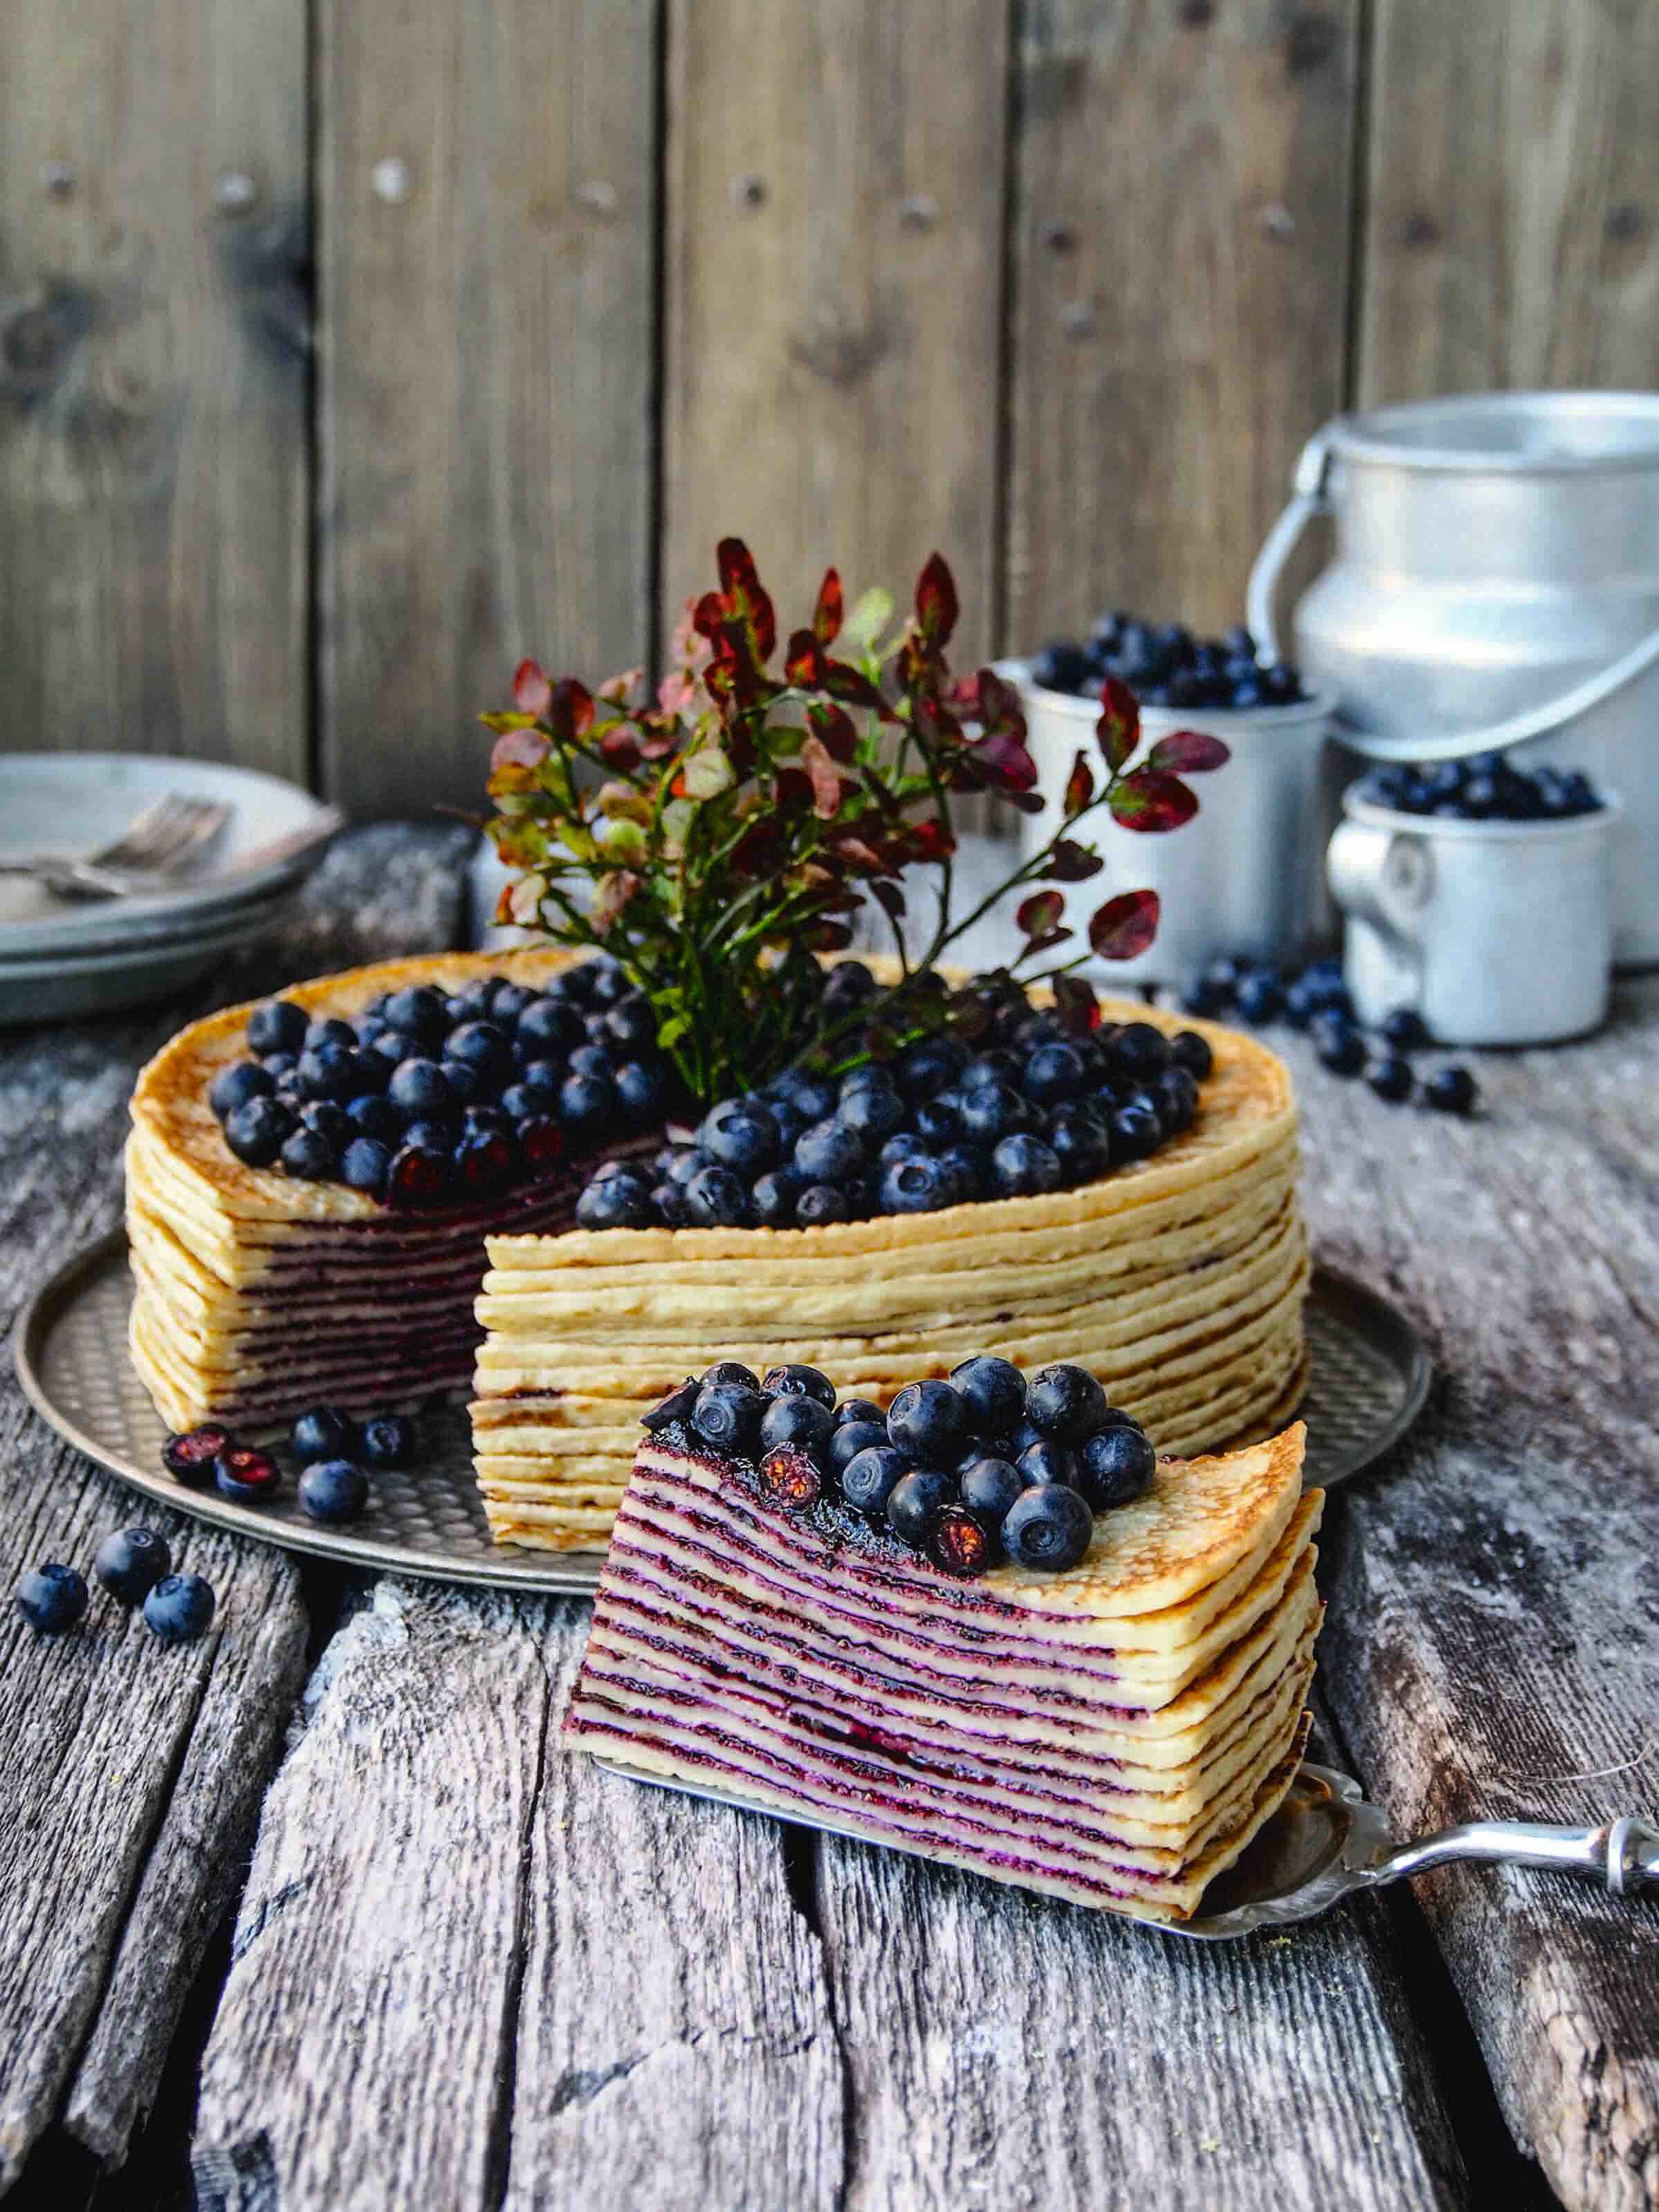 Crepe cake topped with blueberries.